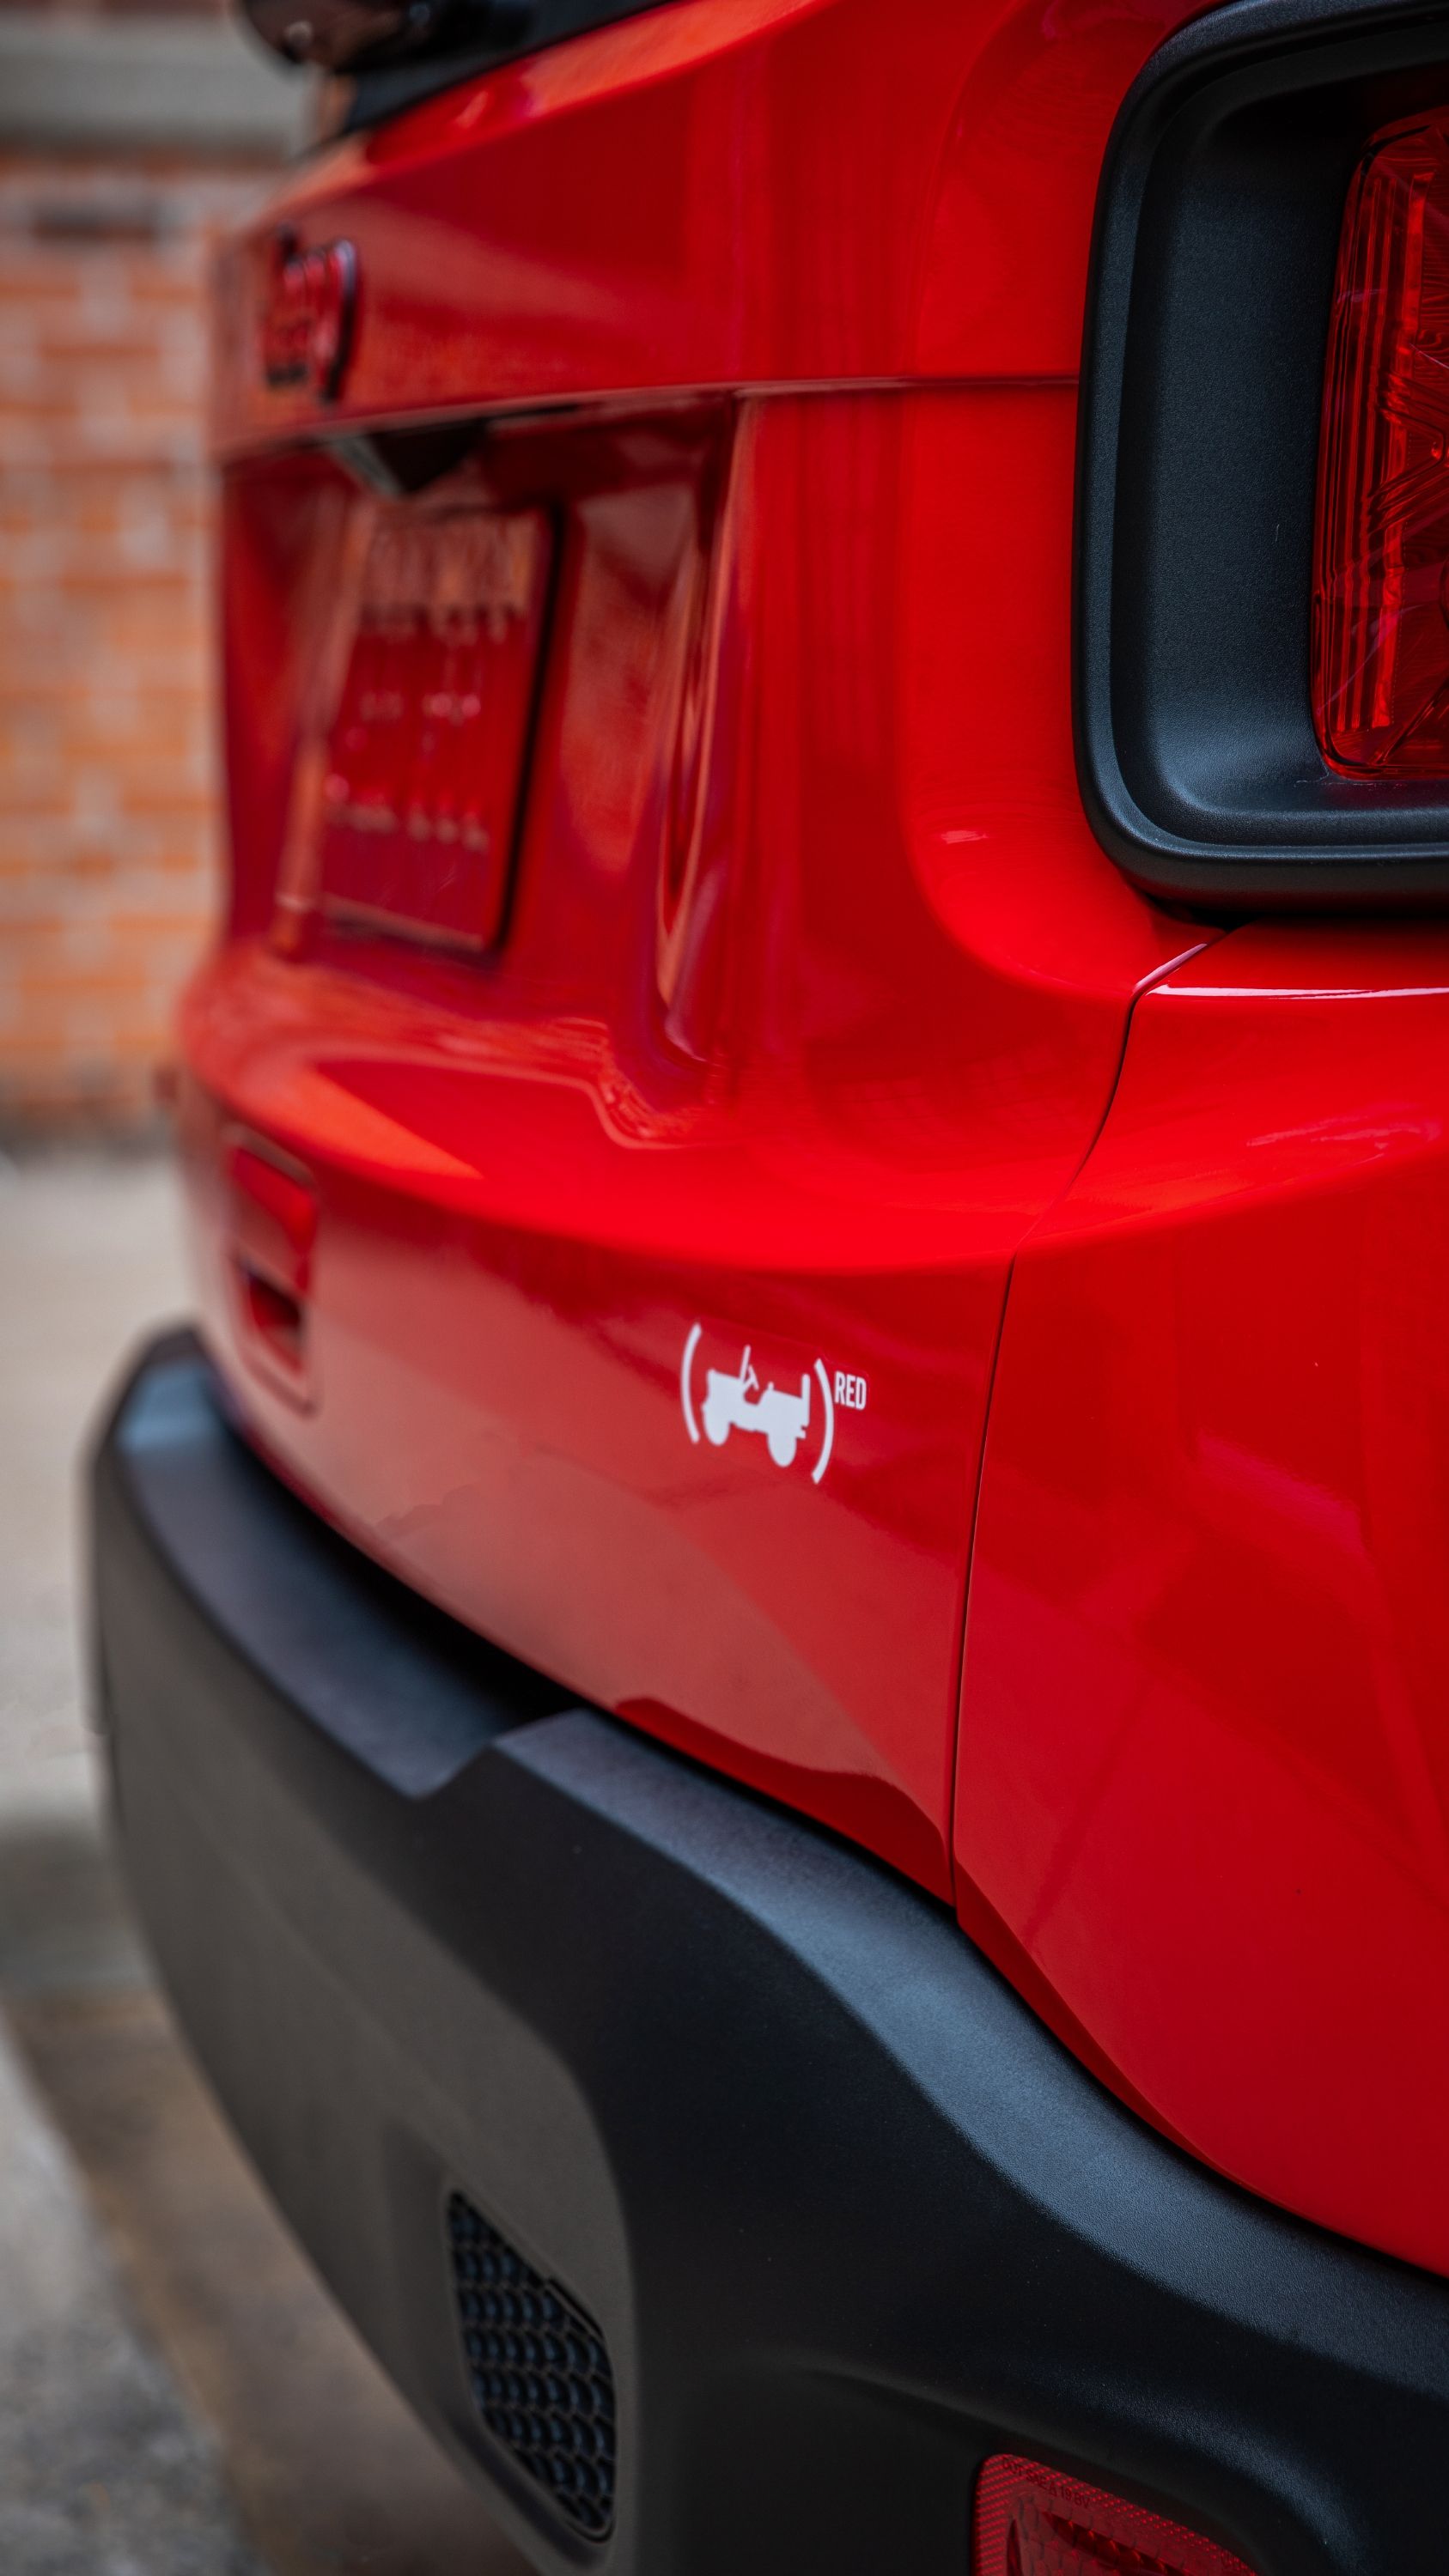 2023 Jeep Renegade Rear Details RED Edition